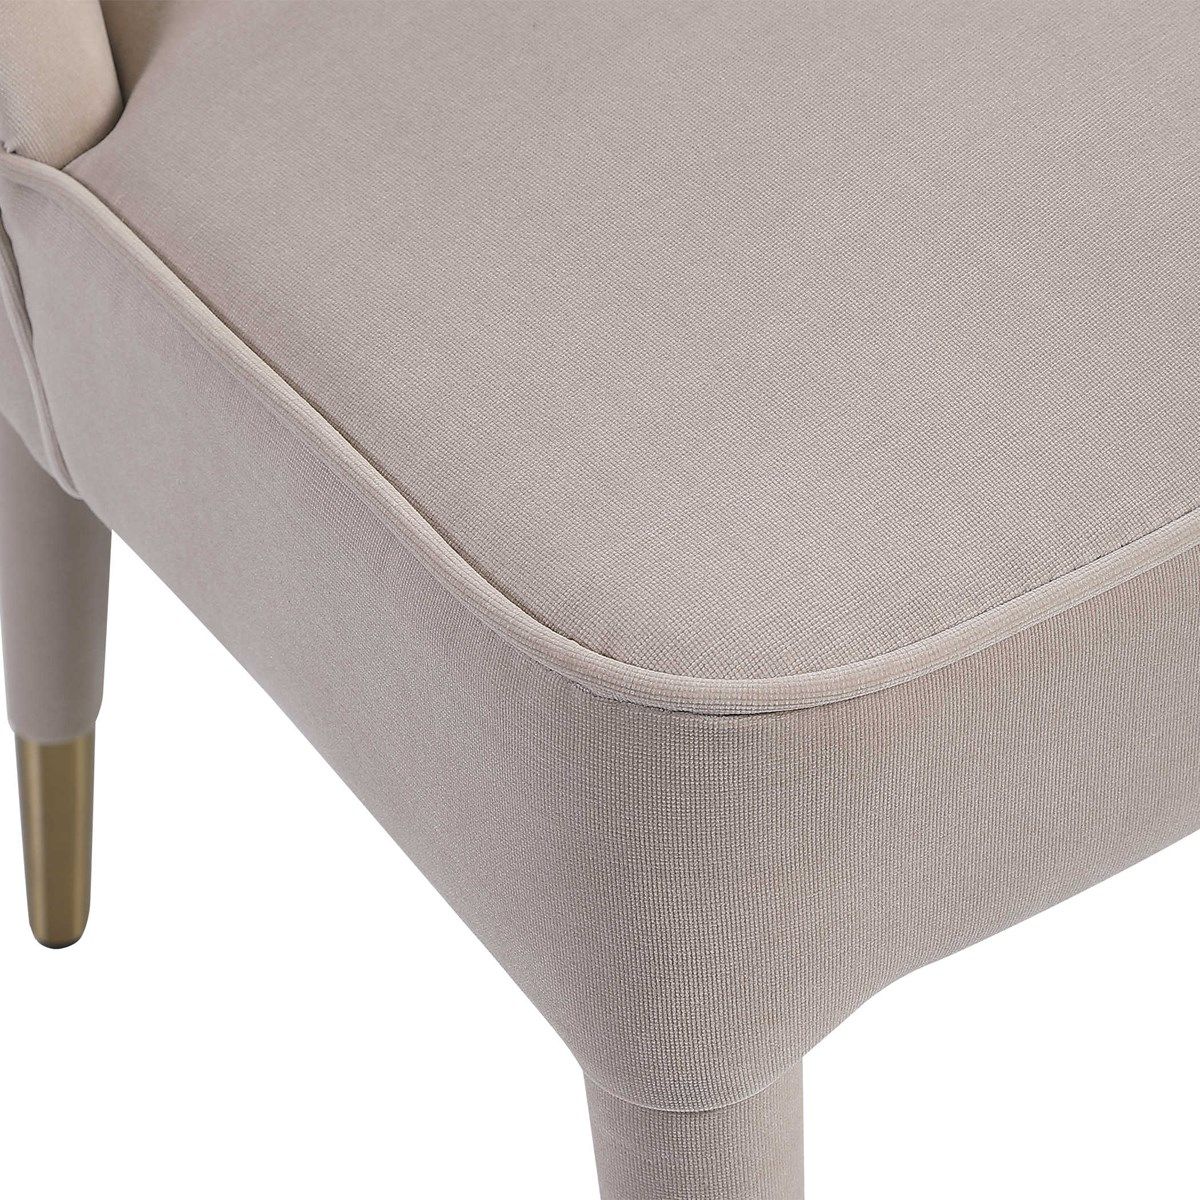 Brie - Armless Chair (Set of 2) - Champagne